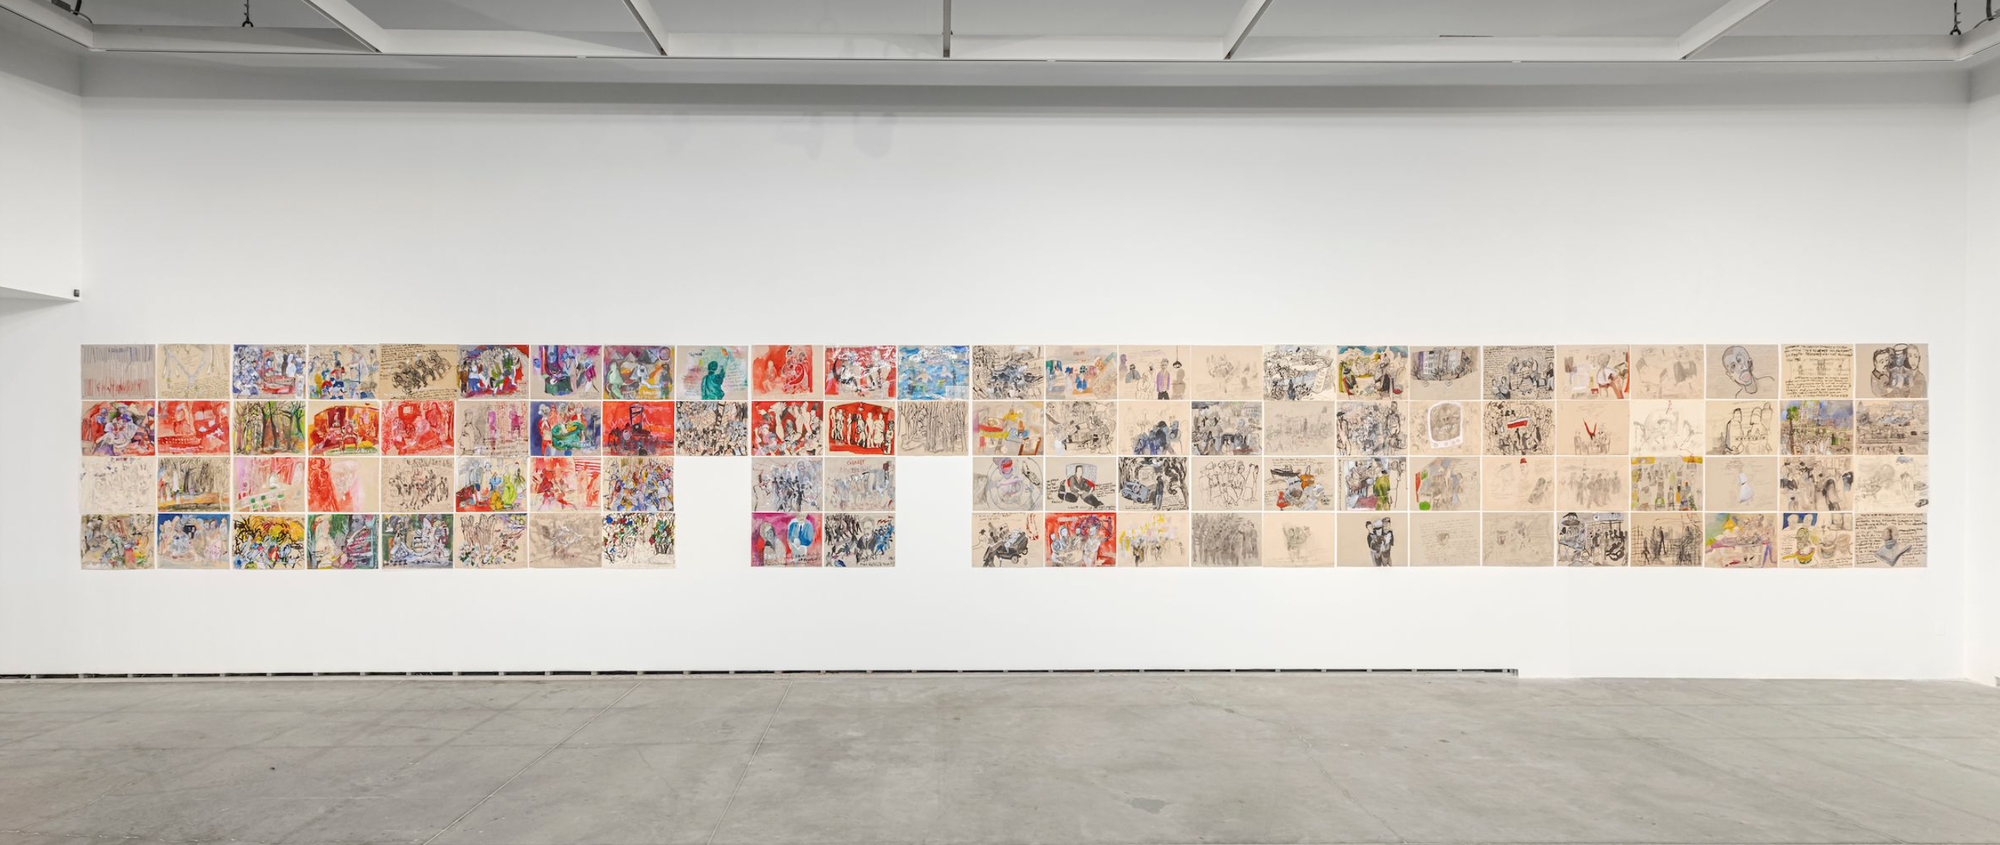 Installation view, Anna Boghiguian, Time of Change, The Power Plant Contemporary Art Gallery, 2023. Photo: Toni Hafkenscheid